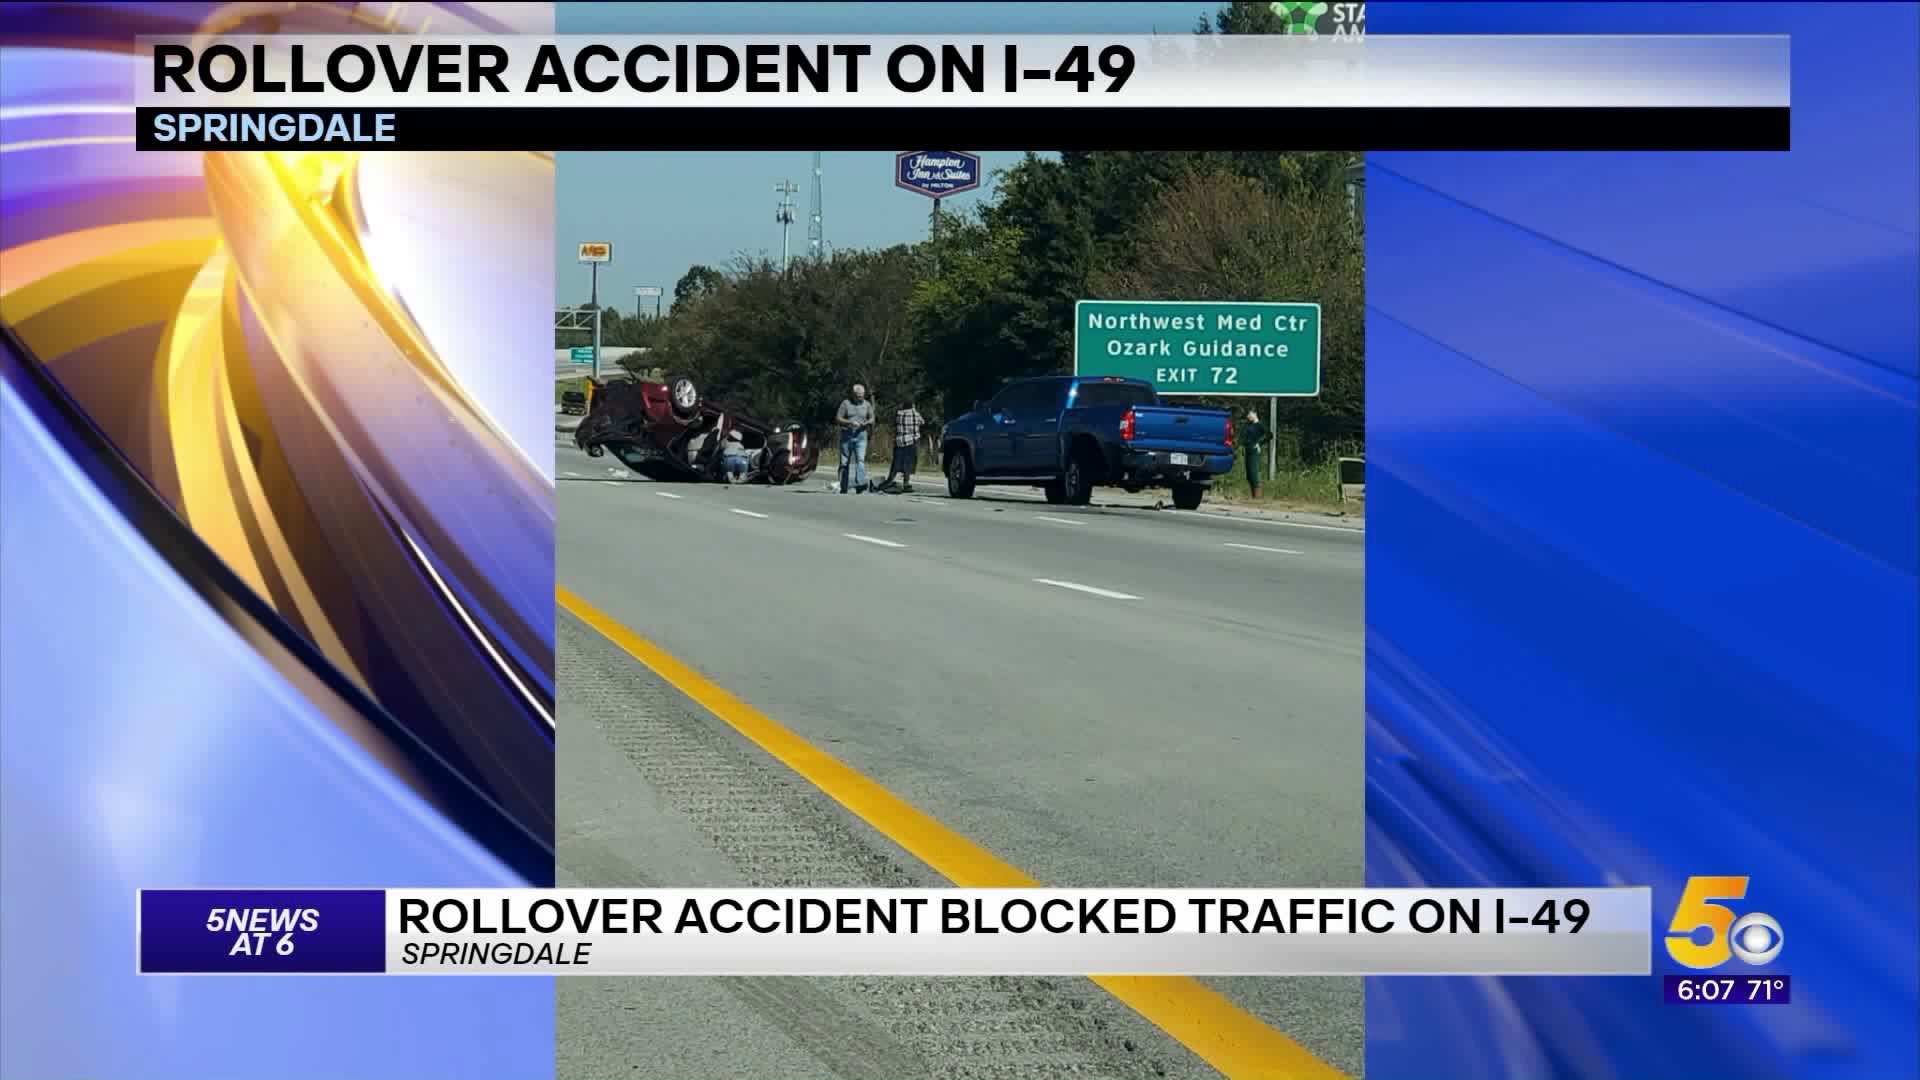 Rollover Accident Blocked Traffic on I-49